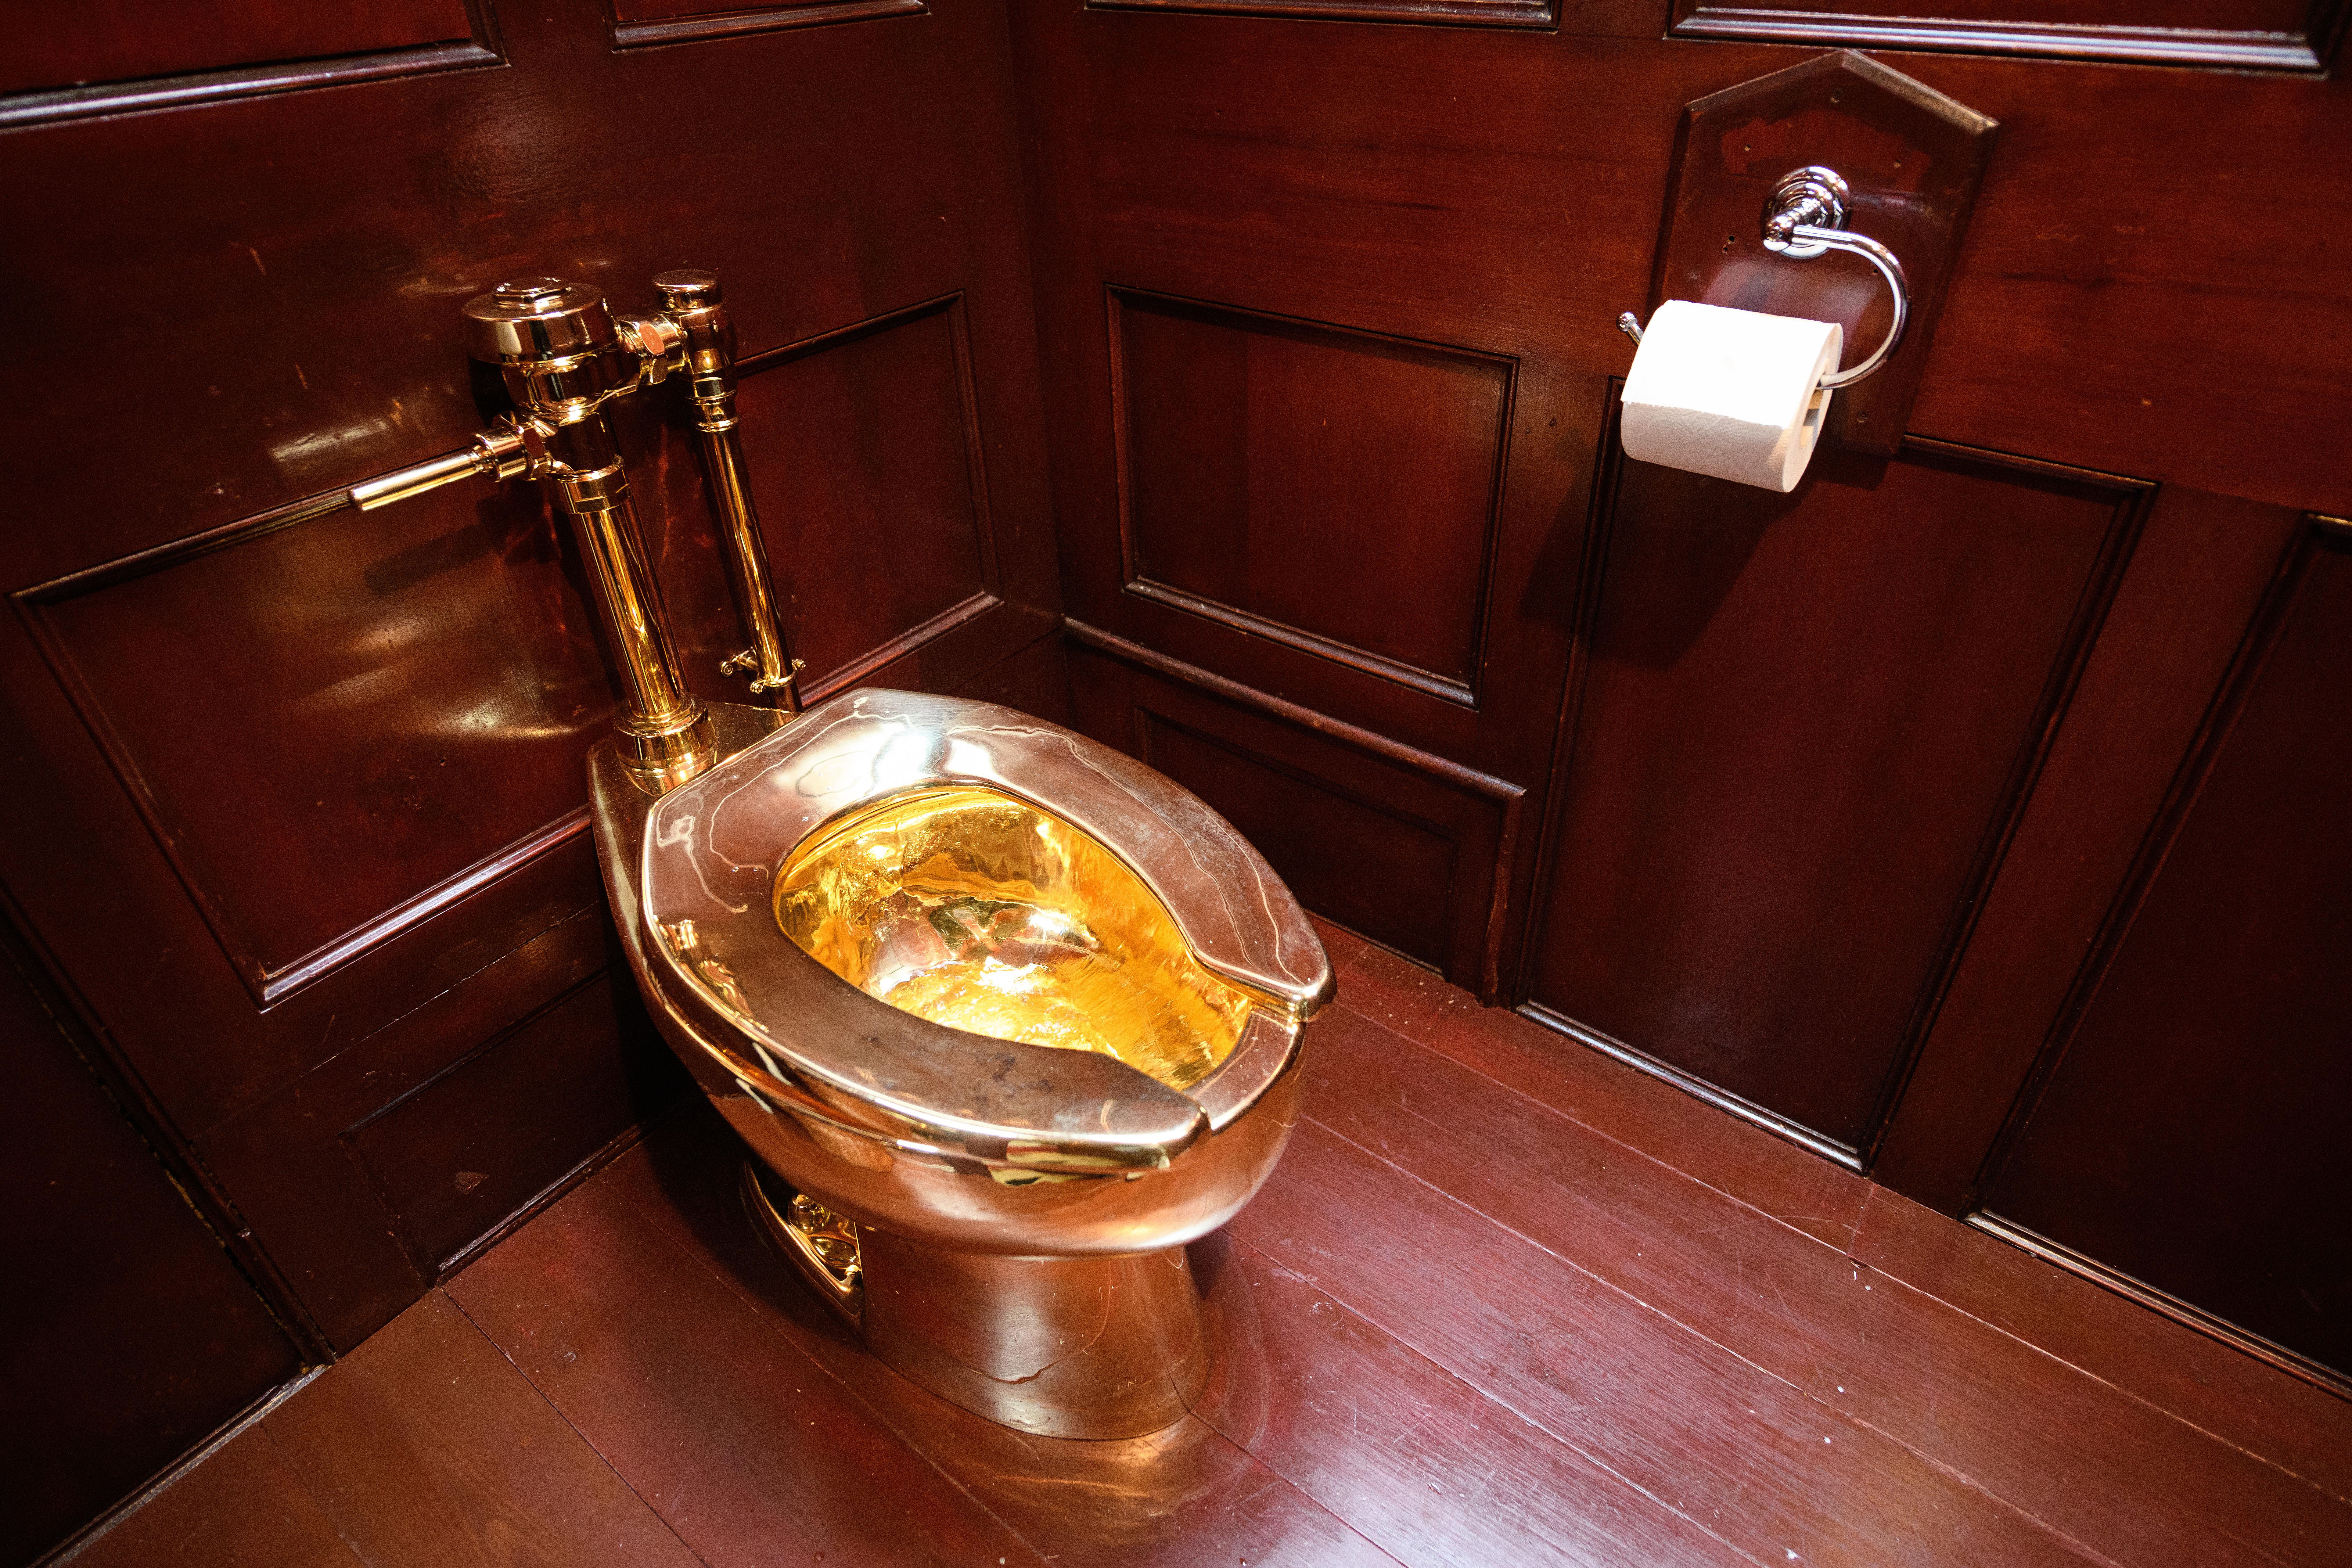 Solid gold toilet and a piece of art, America, created by the artist Maurizio Cattelan, at the exhibition in England in 2019.